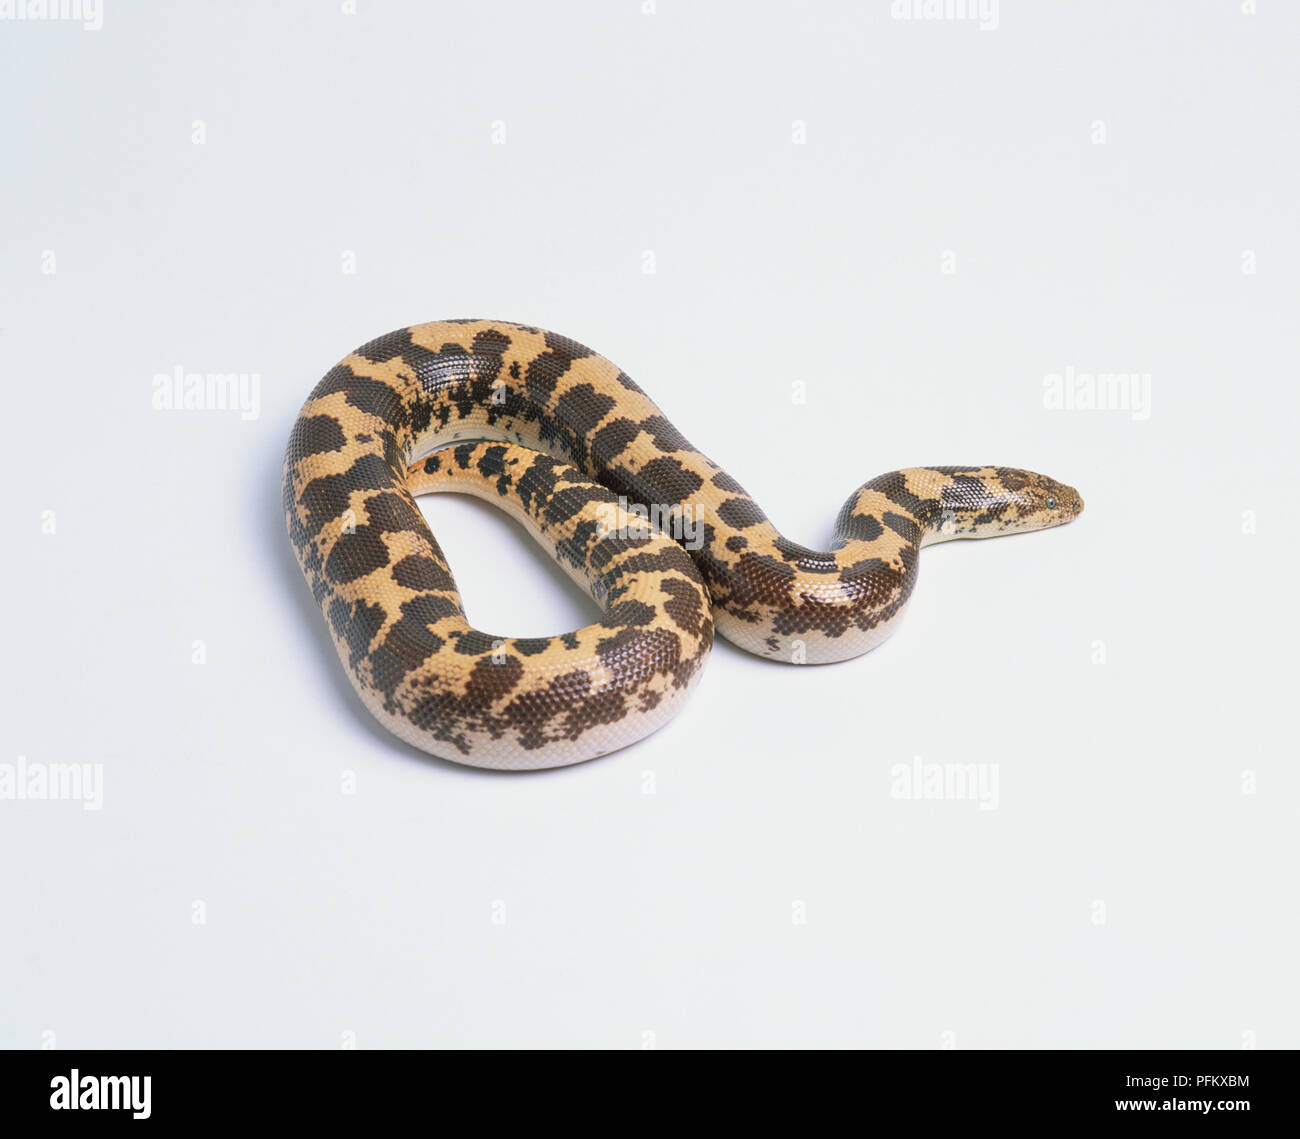 East African Sand Boa (Gongylophis Colubrinus), with stout body, short tail, white underside, and wedge-shaped head Stock Photo